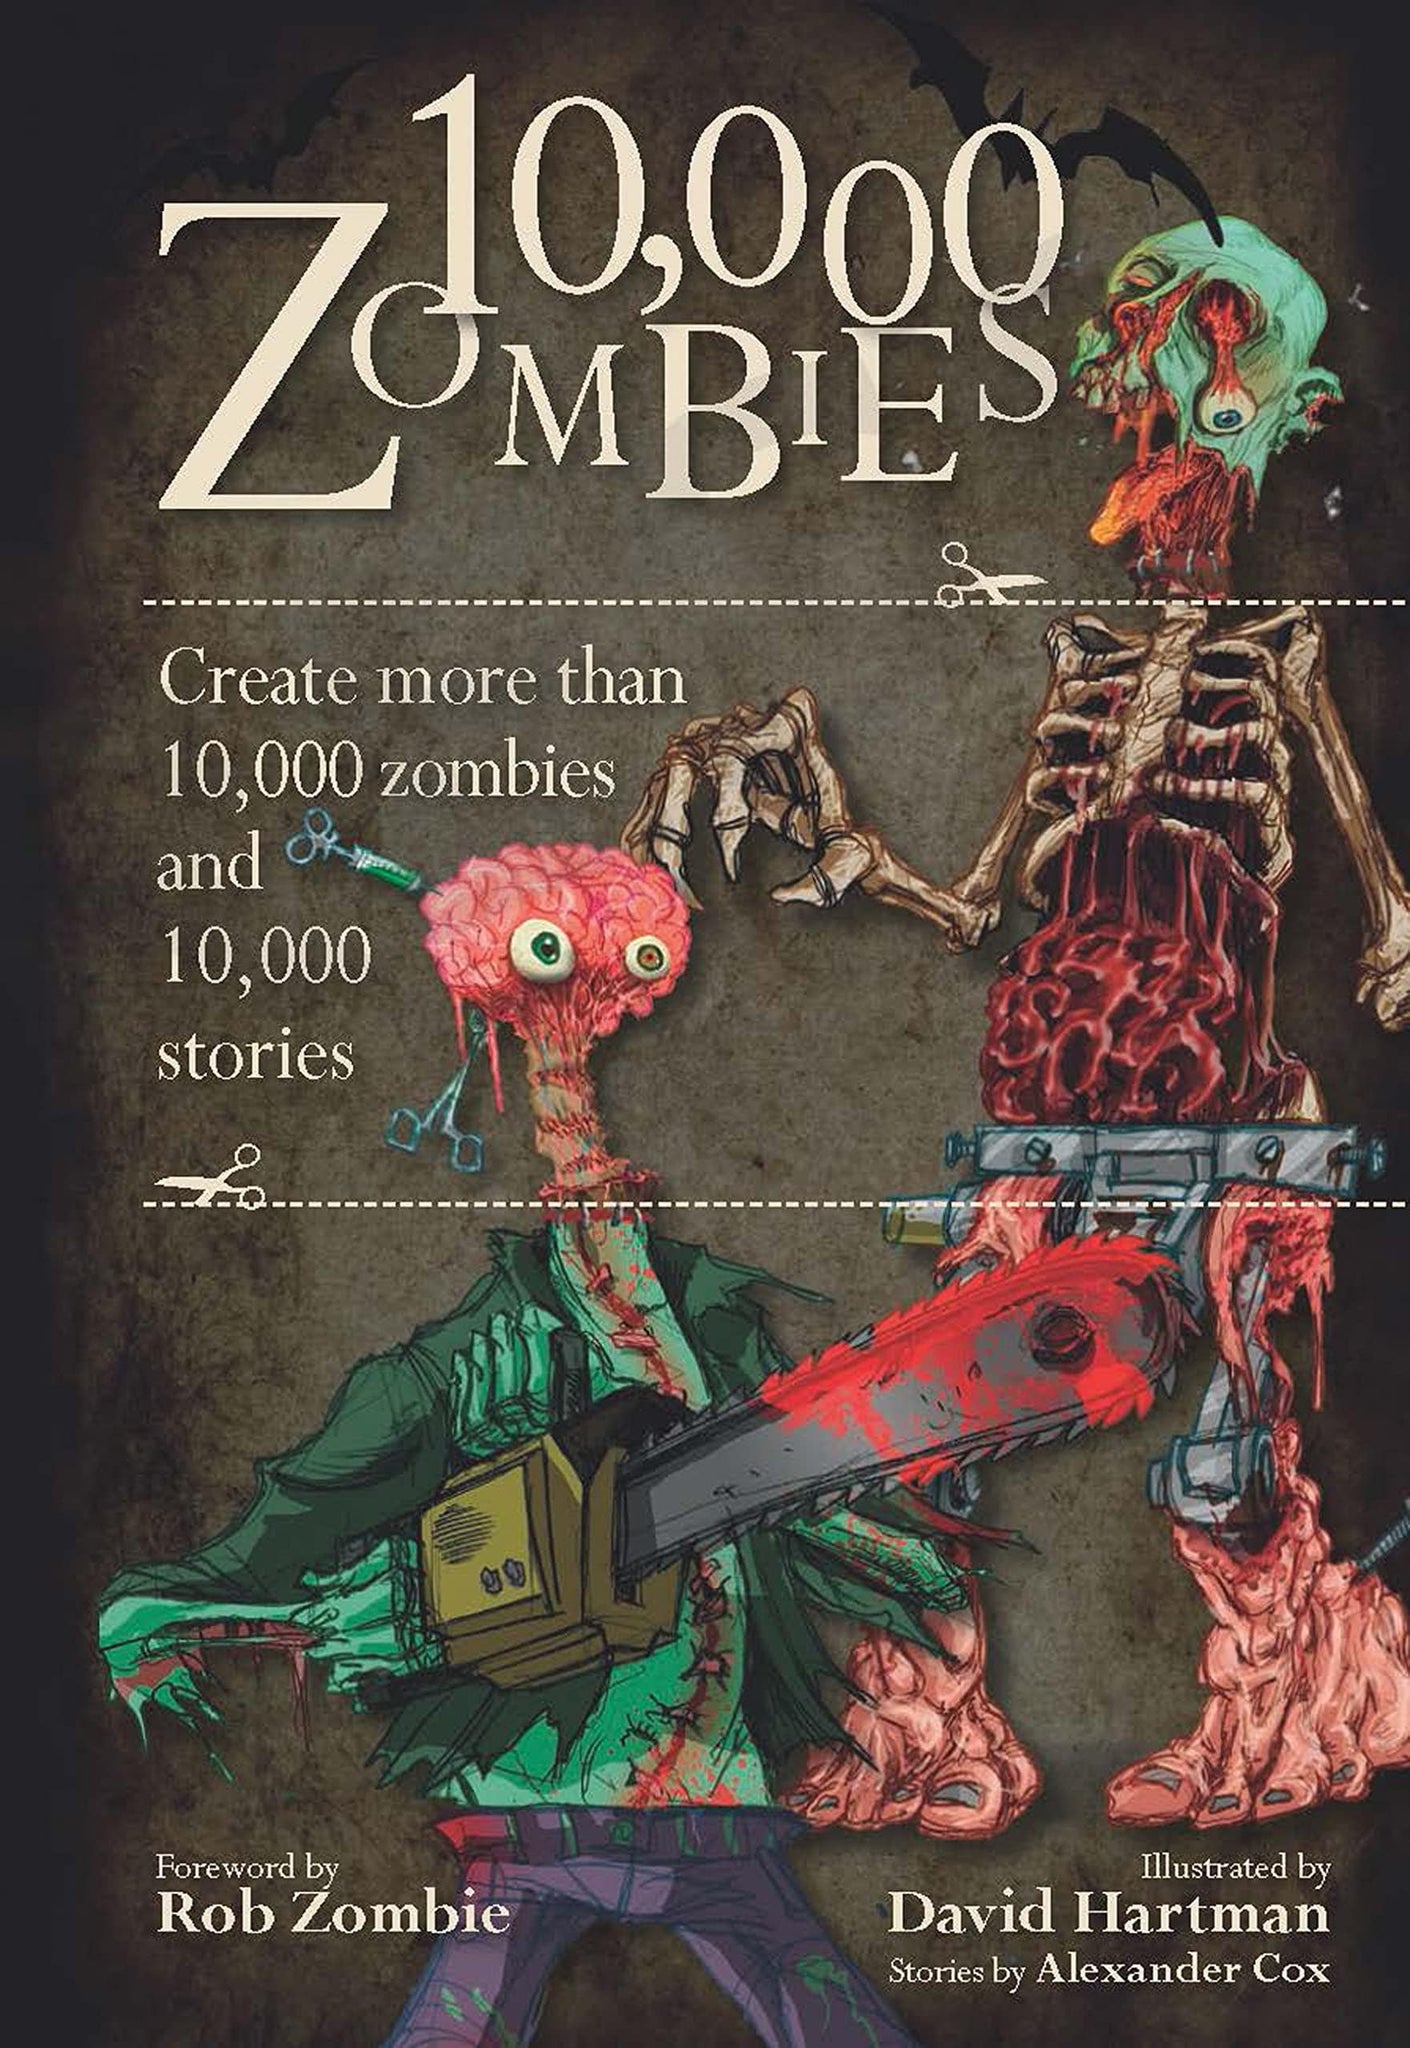 10,000 Zombies: Create More than 10,000 Zombies and 10,000 Stories ...